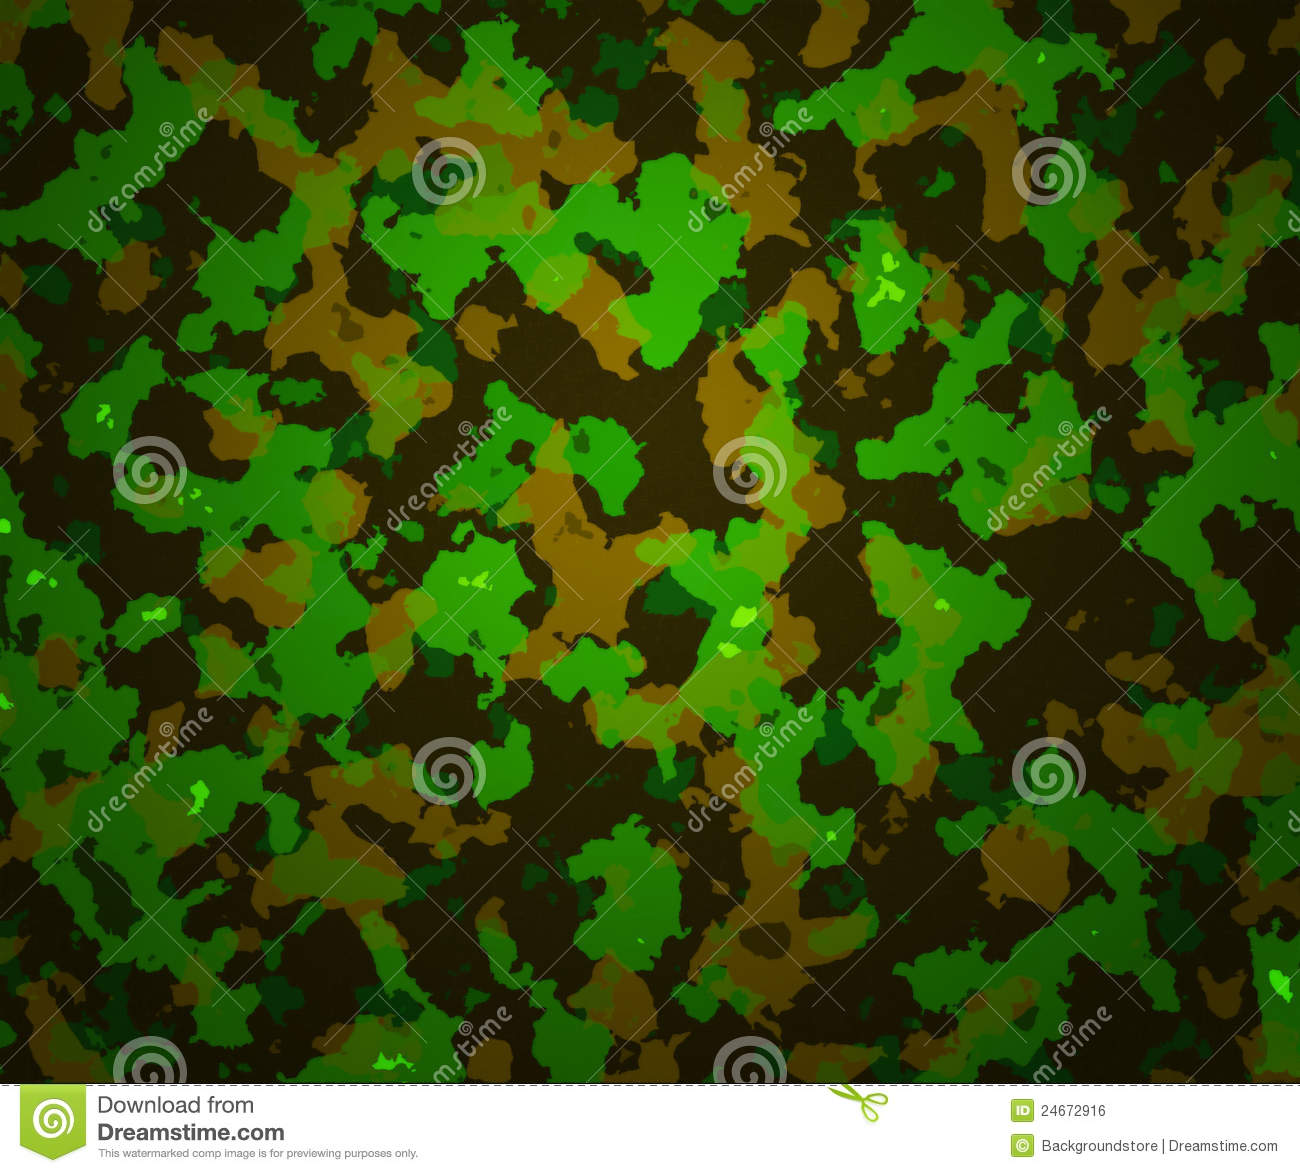 Camouflage Texture Army Background Royalty Free Stock Image   Image